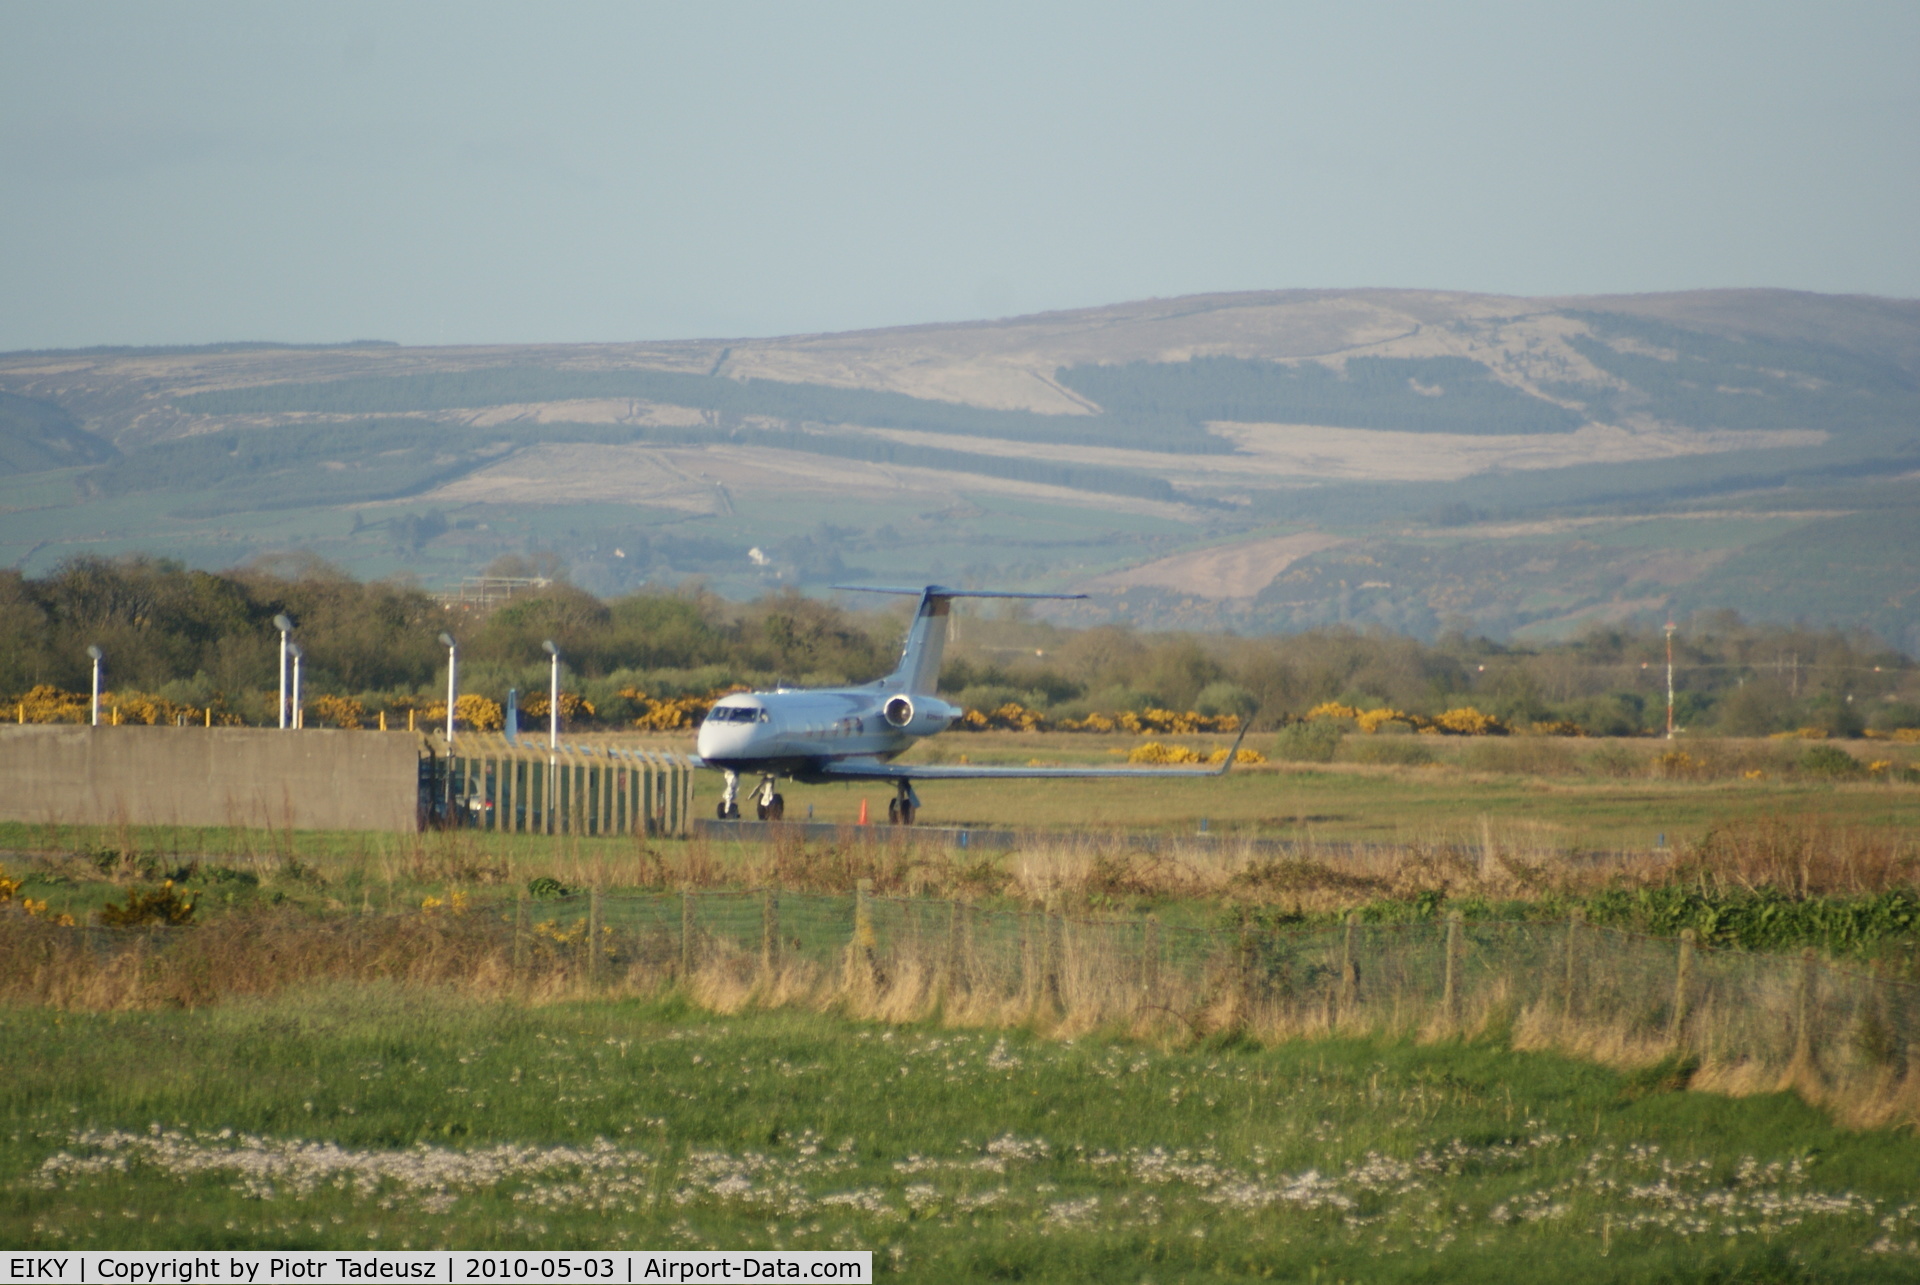 Kerry Airport (Farranfore Airport), Farranfore, County Kerry Ireland (EIKY) - Kerry Airport